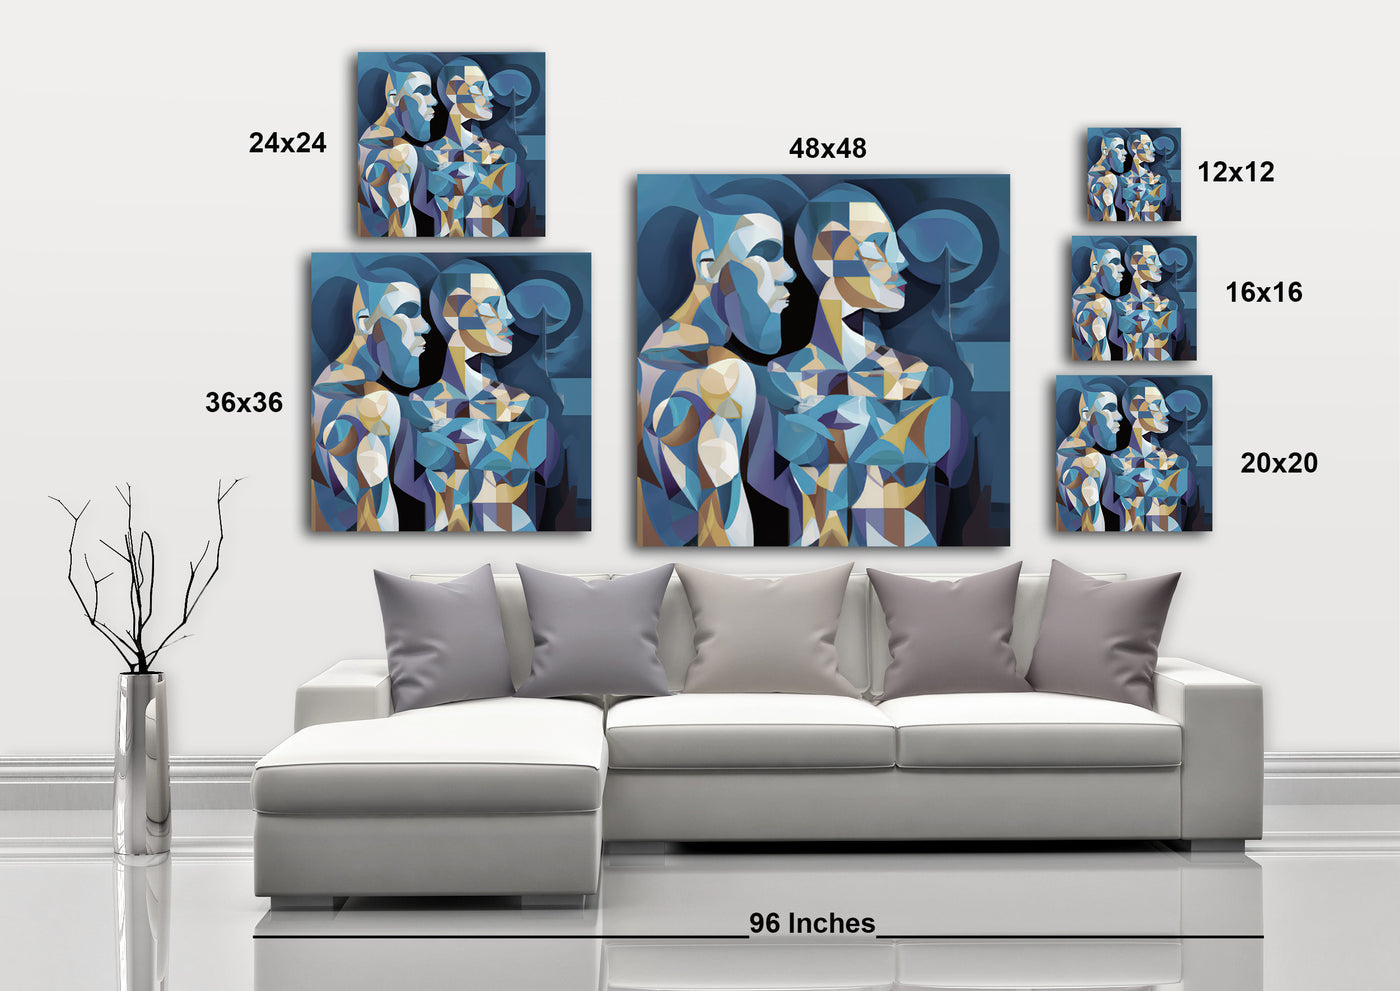 Best Friends I - Gallery Wrapped Canvas